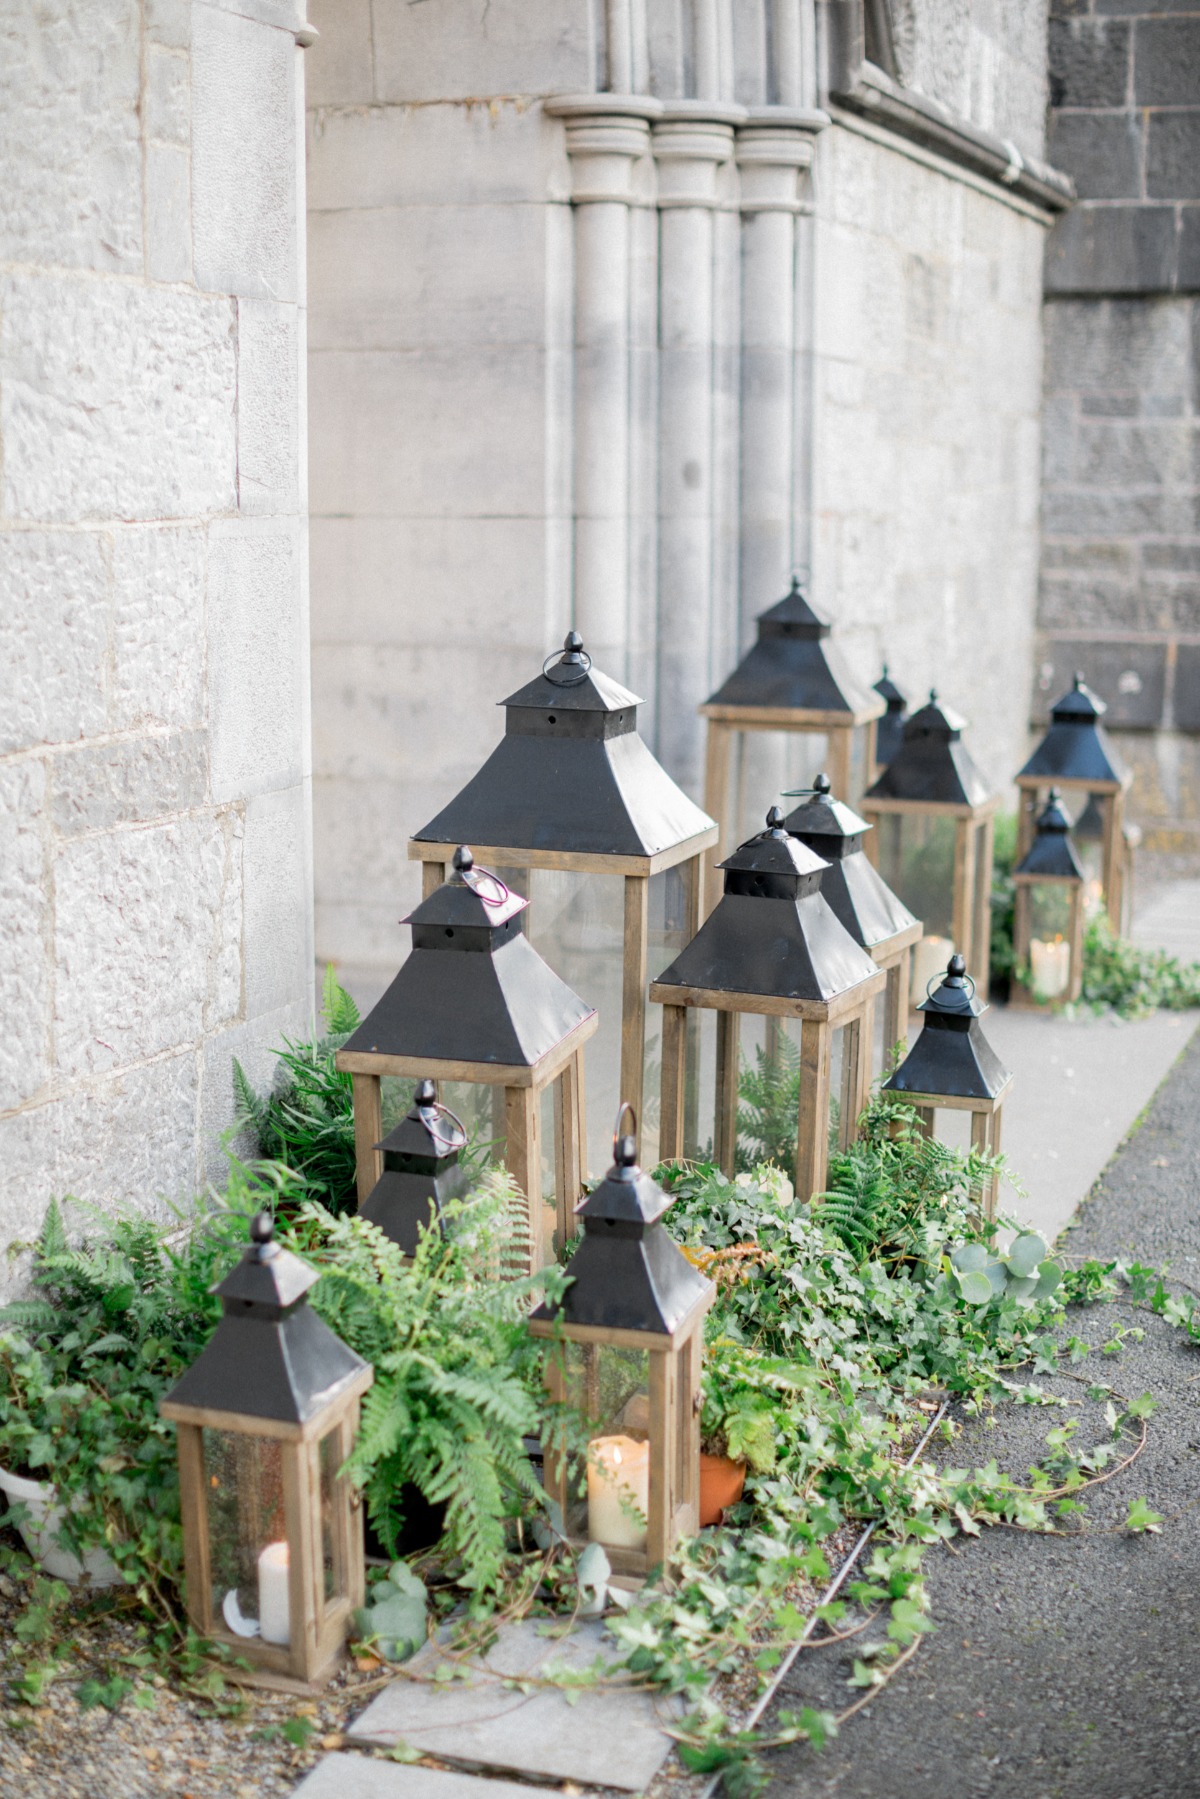 Church decorated with ivy and lanterns for wedding ceremony